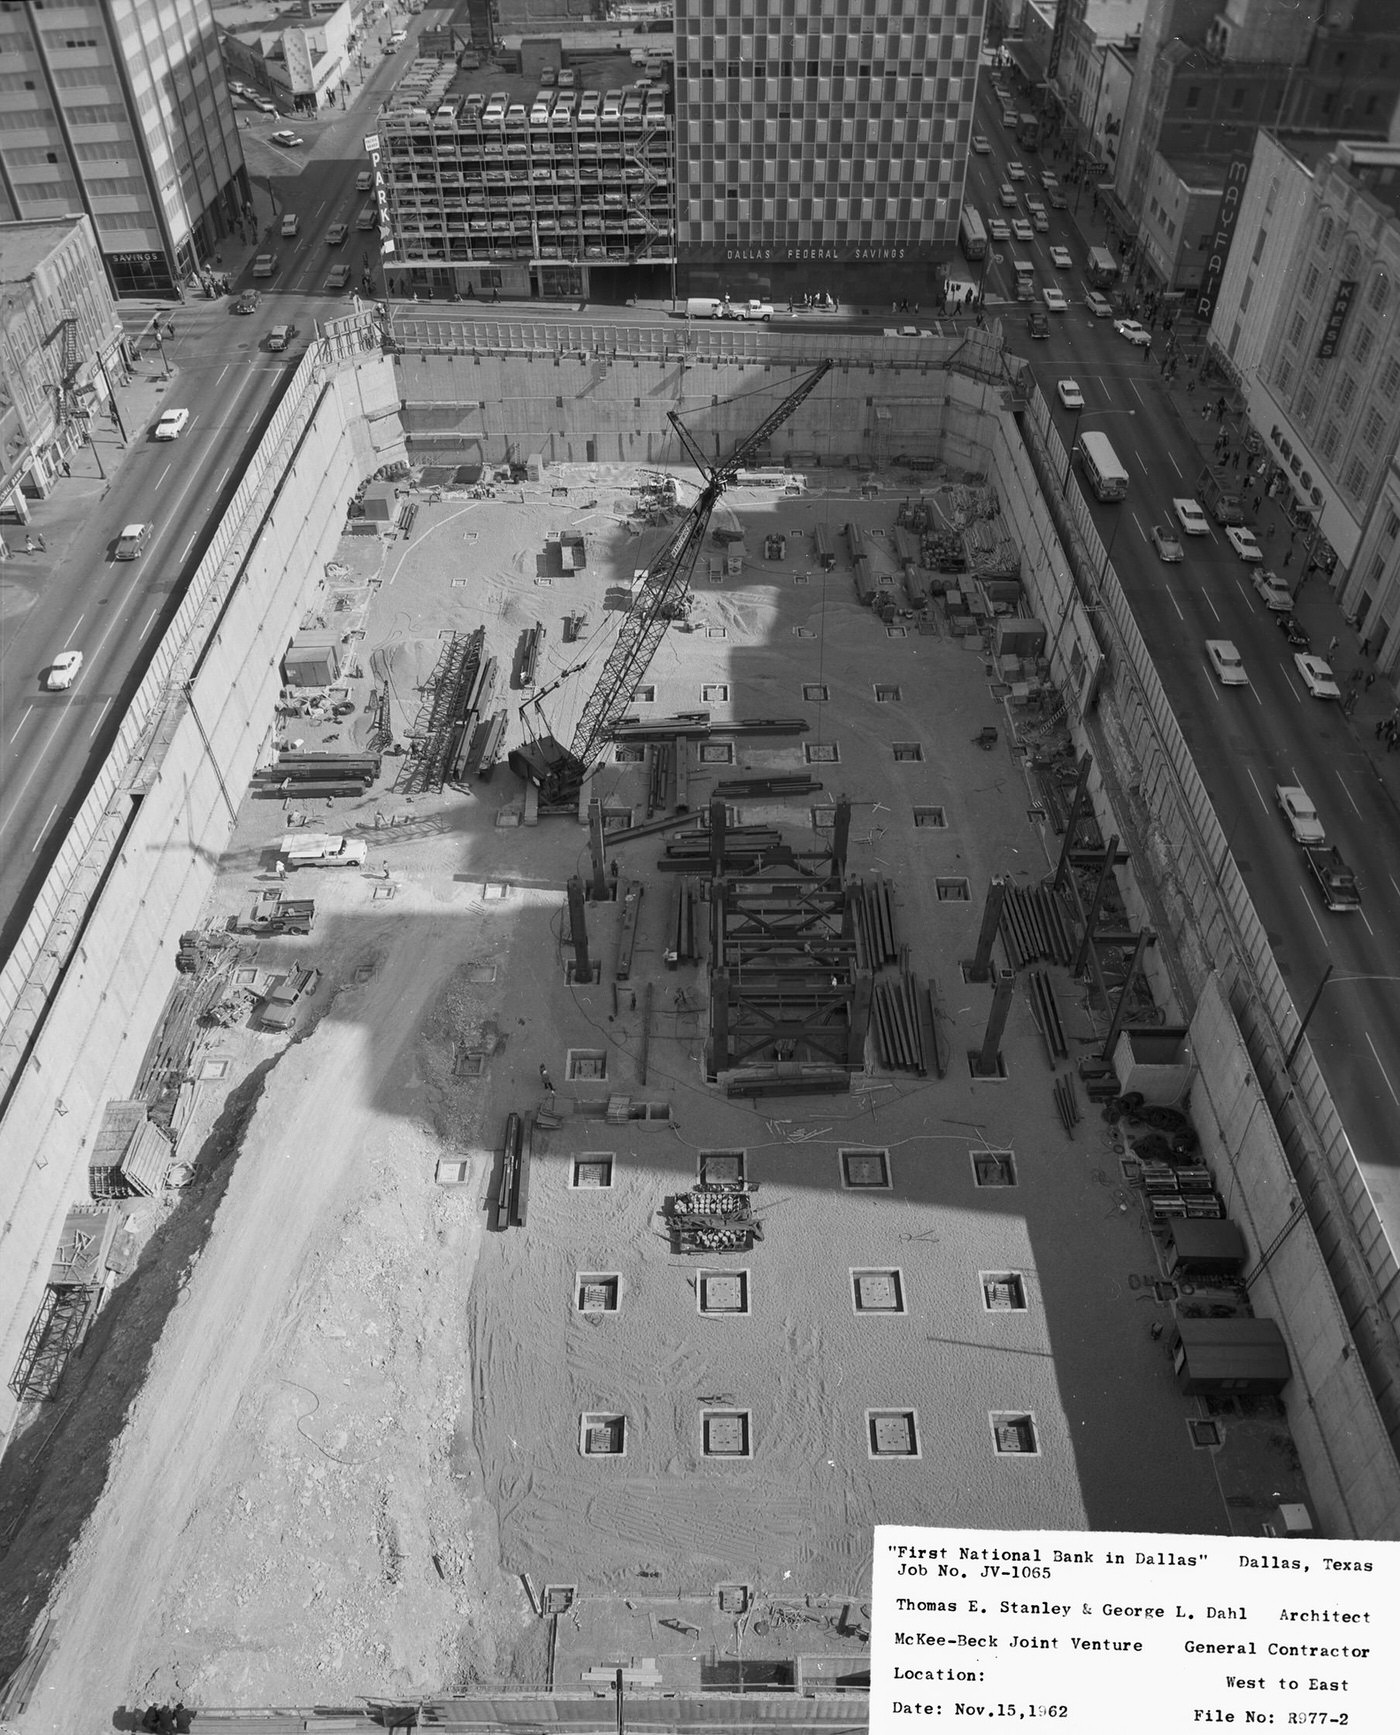 First National Bank building under construction, downtown Dallas, Texas, 1963